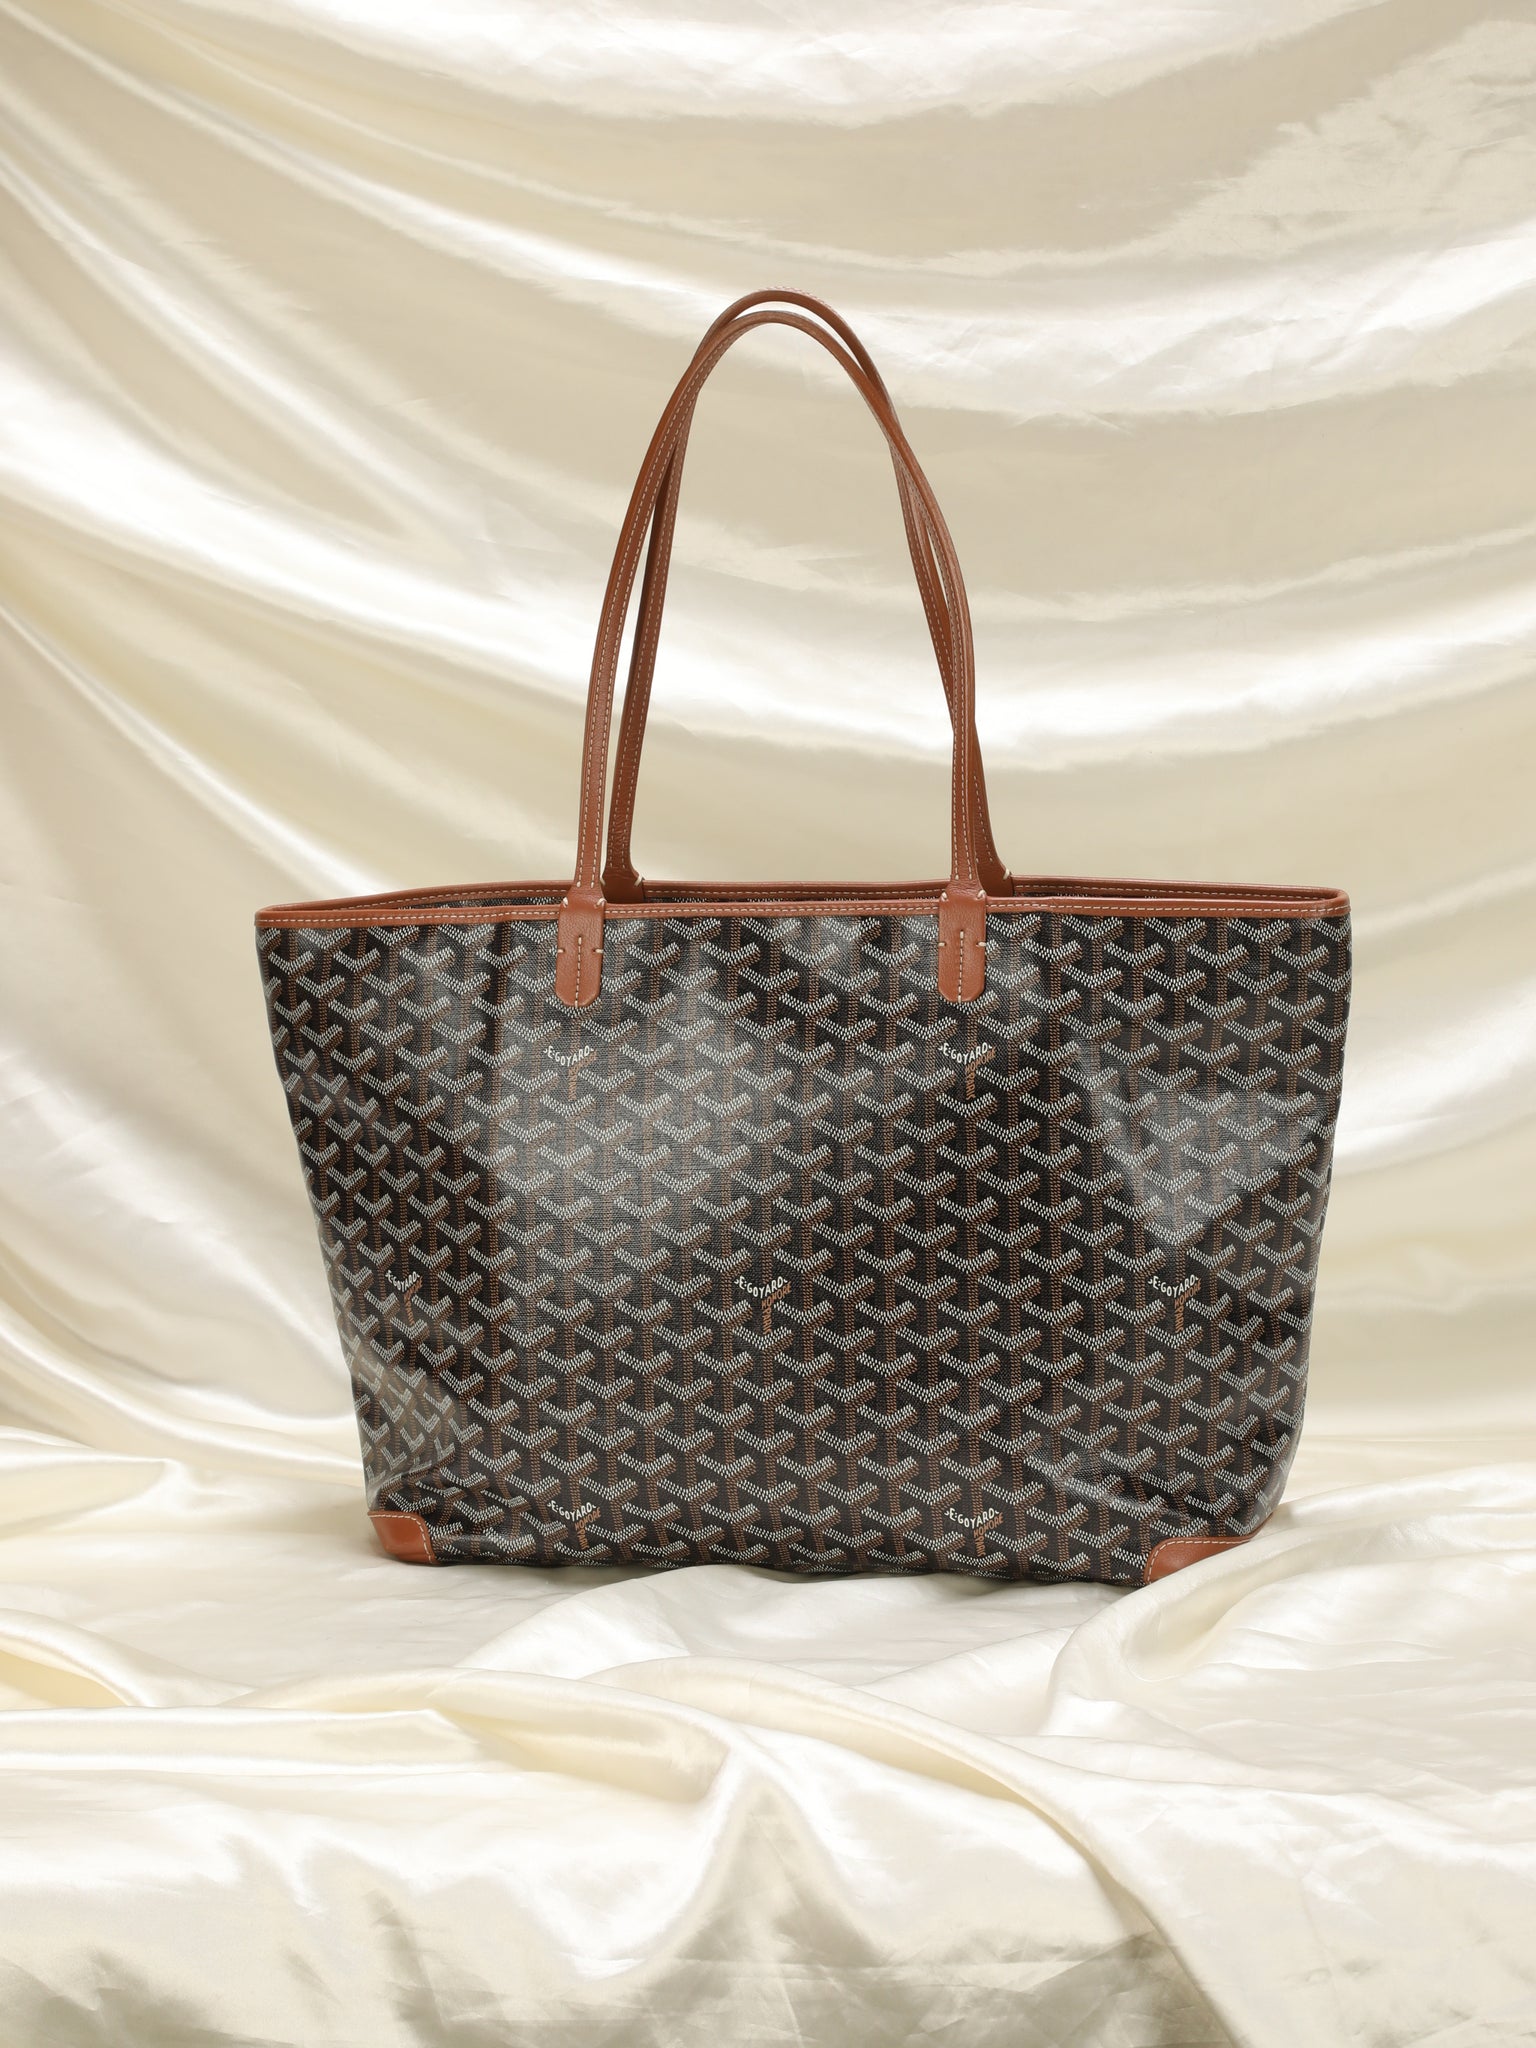 REVIEW: EVERYTHING you need to know about the Goyard Artois MM vs